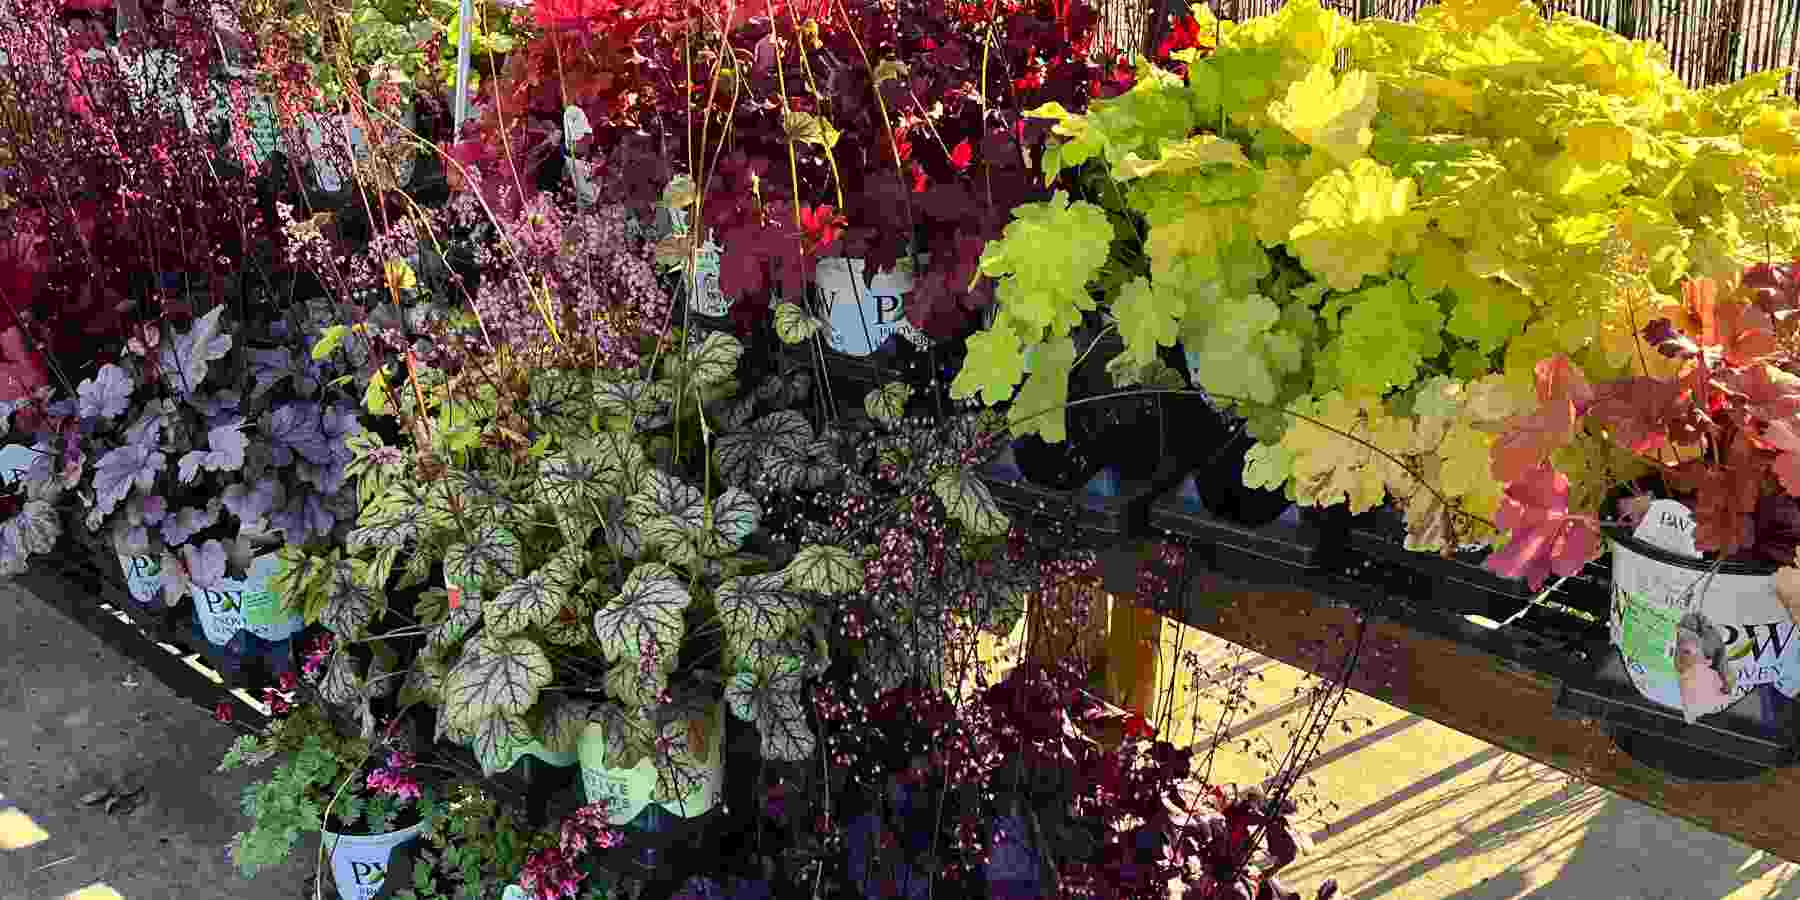 image of a large group of coral bells plants with oak shaped leaves in many colors fro light green to dark purple